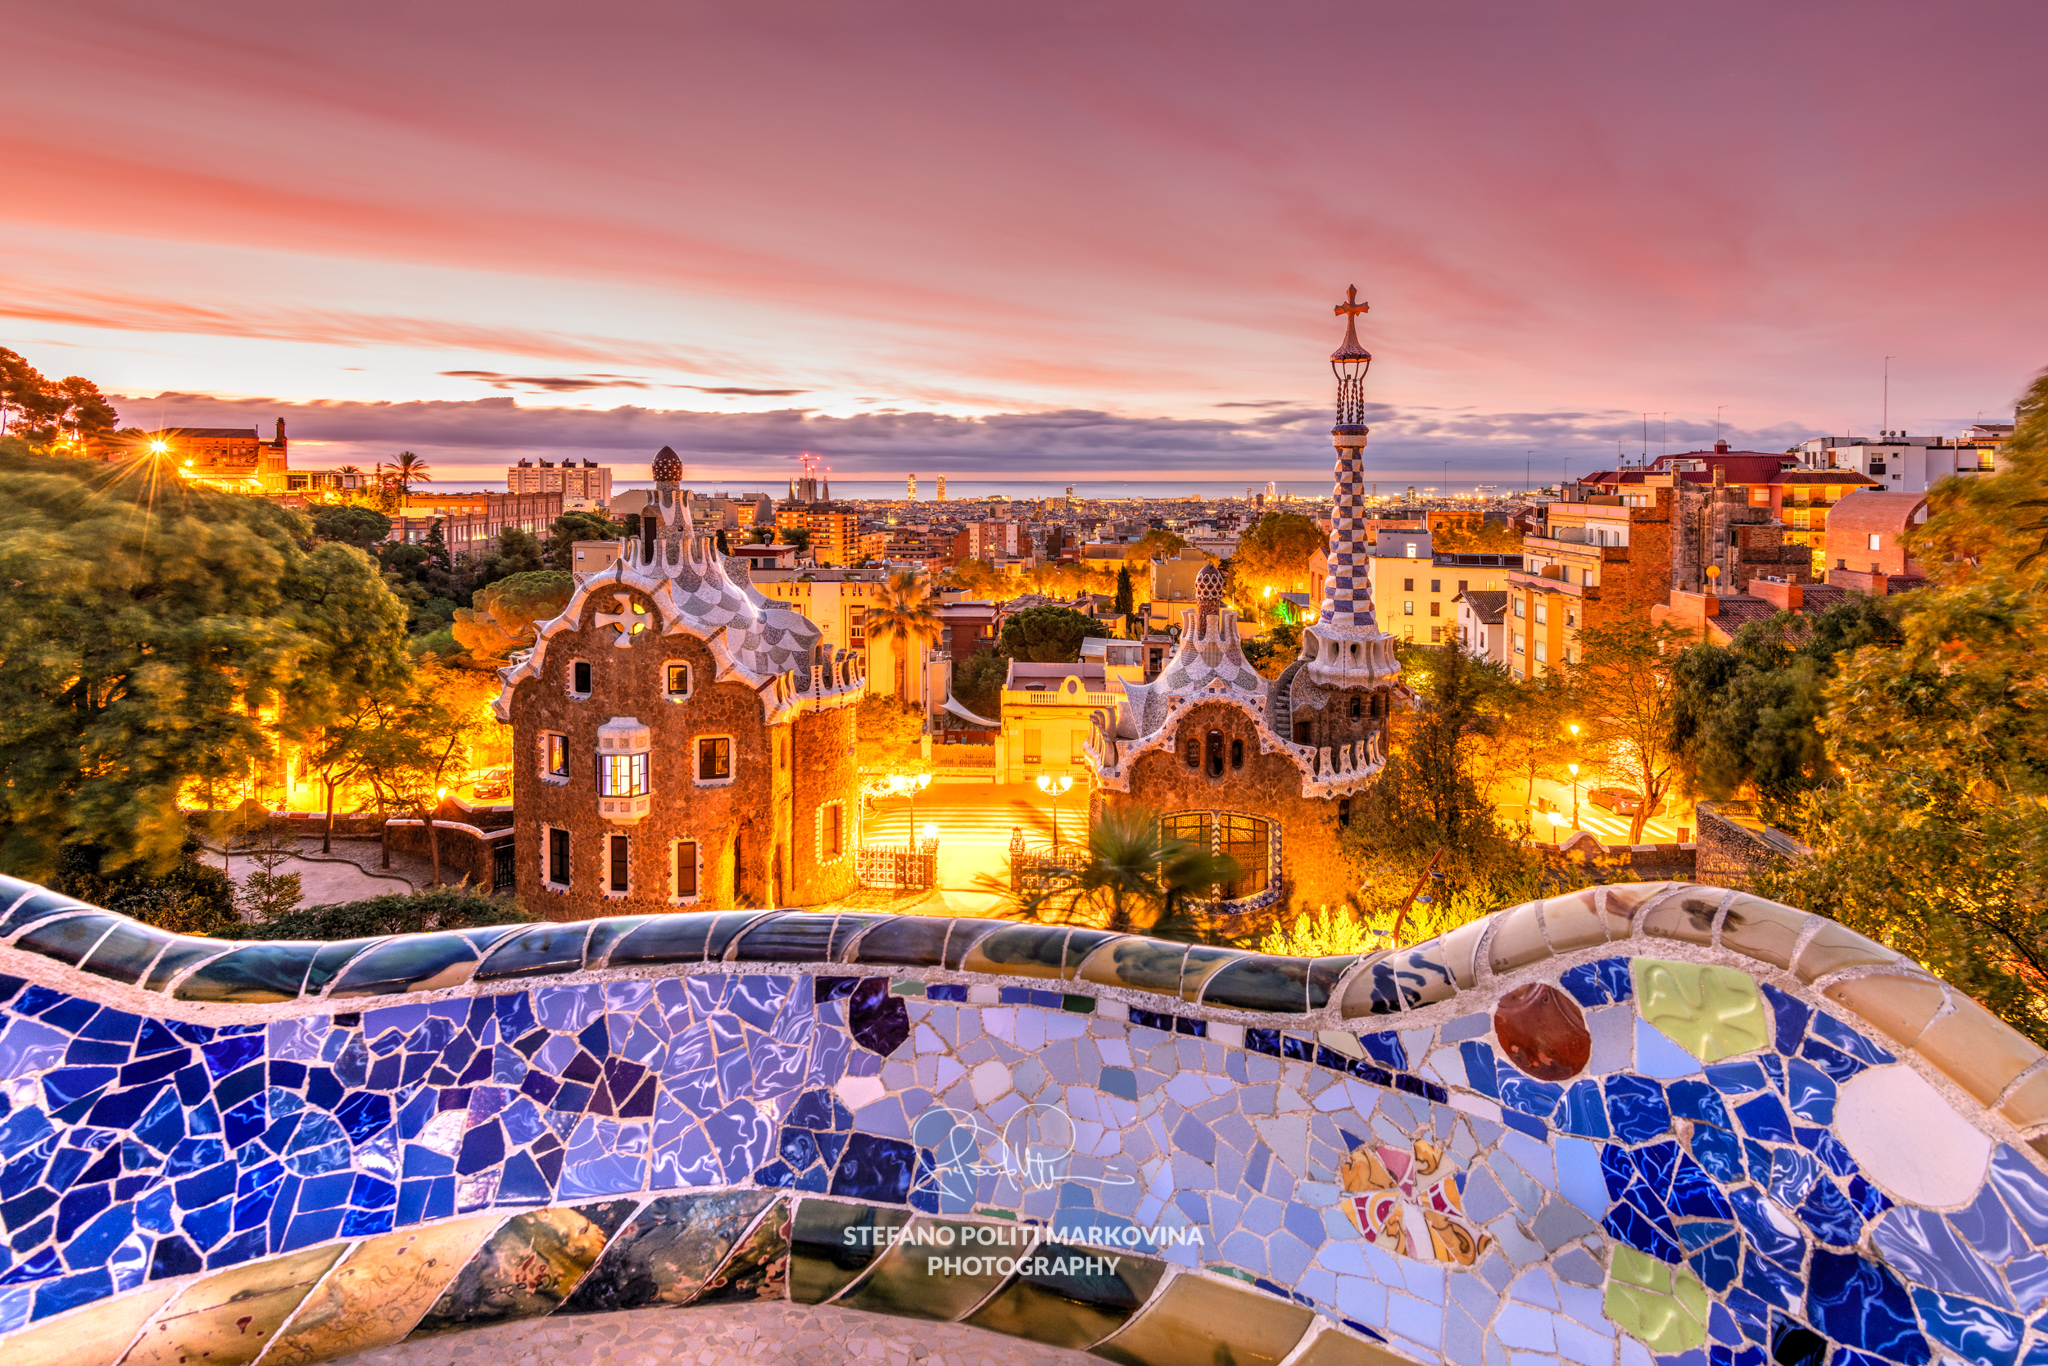 <p>is a privatized park system composed of gardens and architectural elements located on Carmel Hill, in Barcelona, Catalonia, Spain. With urbanization in mind, Eusebi Güell assigned the design of the park to Antoni Gaudí.</p>